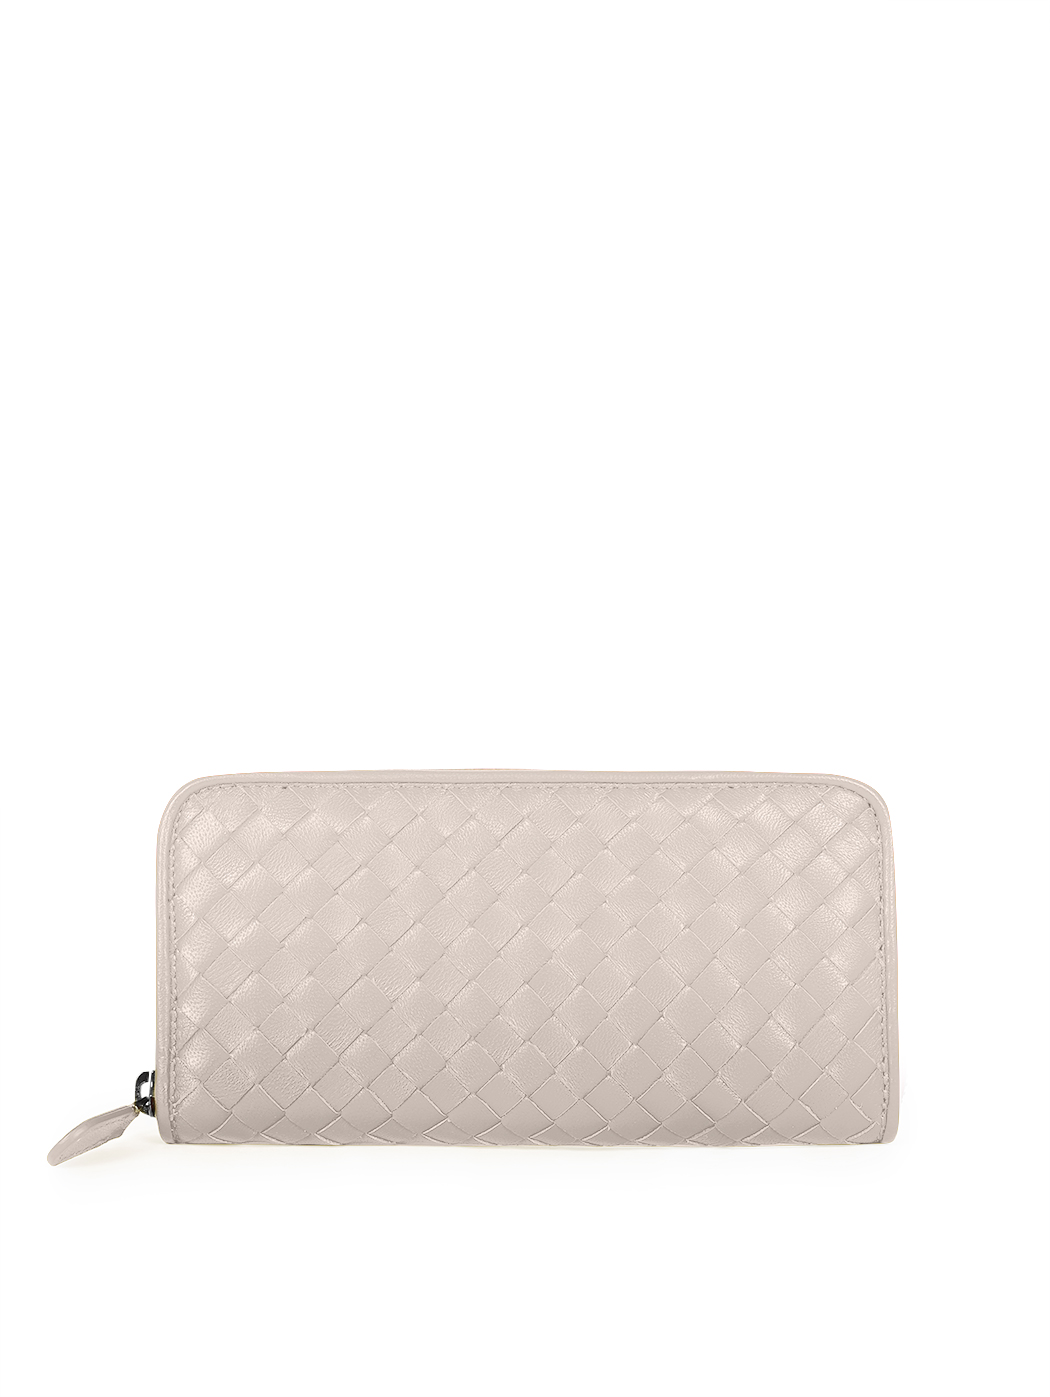 Long zip-around wallet in powder pink woven leather